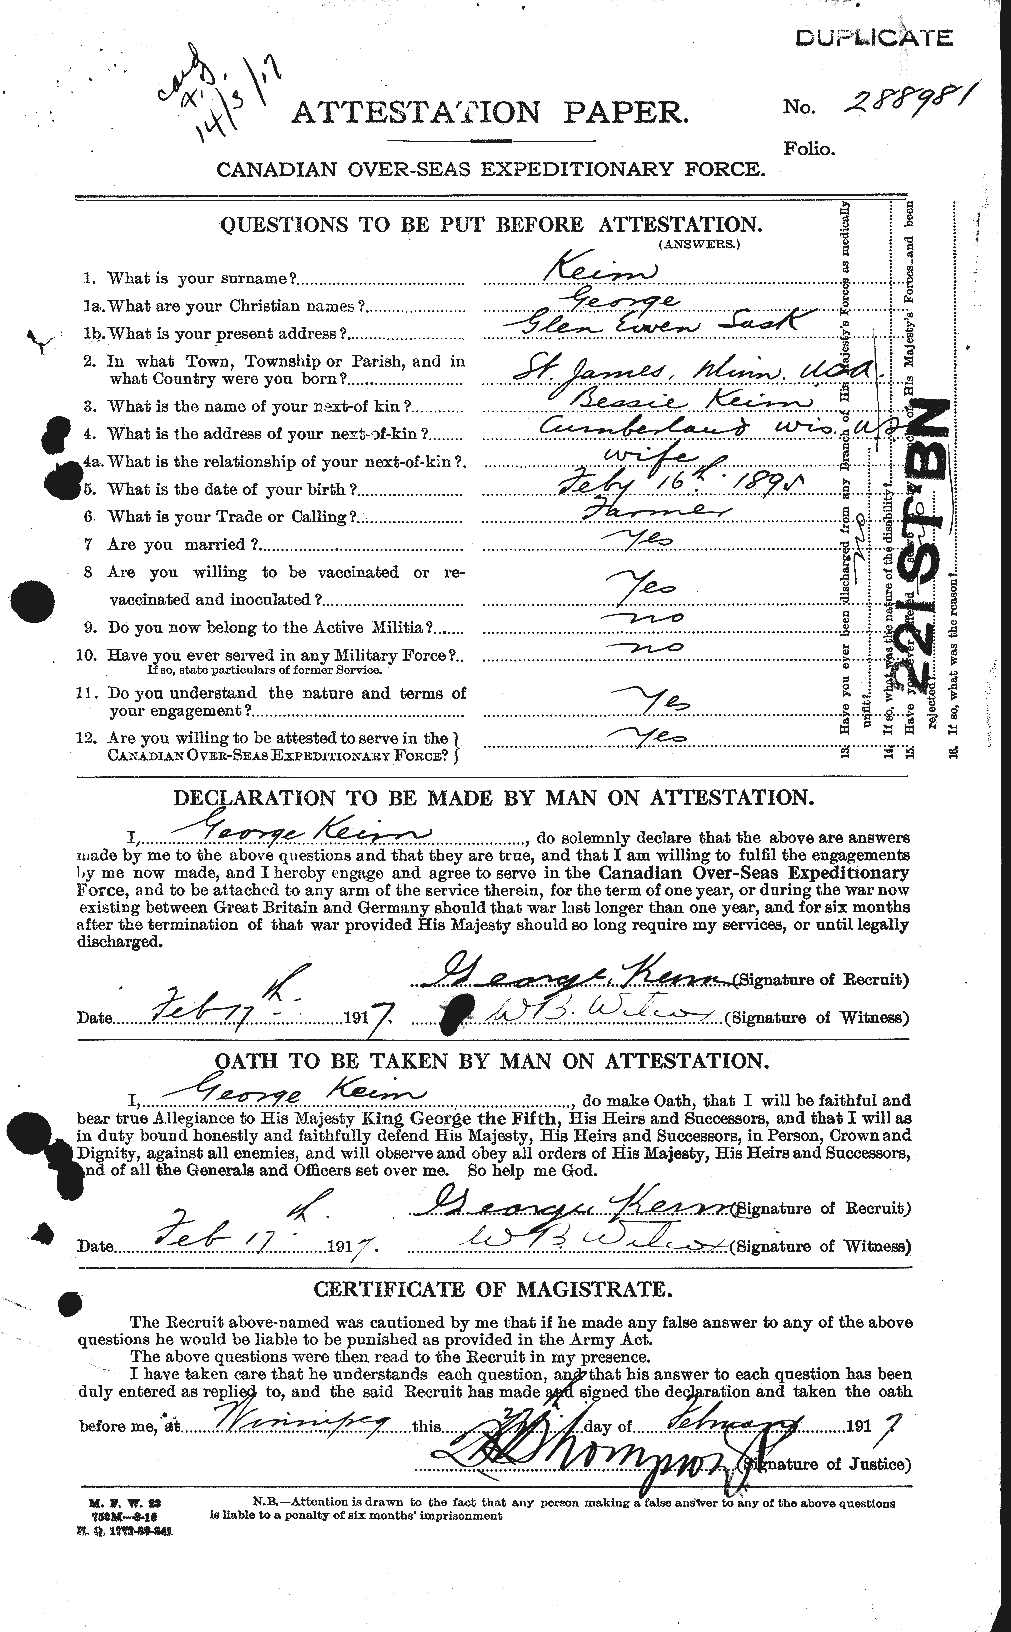 Personnel Records of the First World War - CEF 432317a